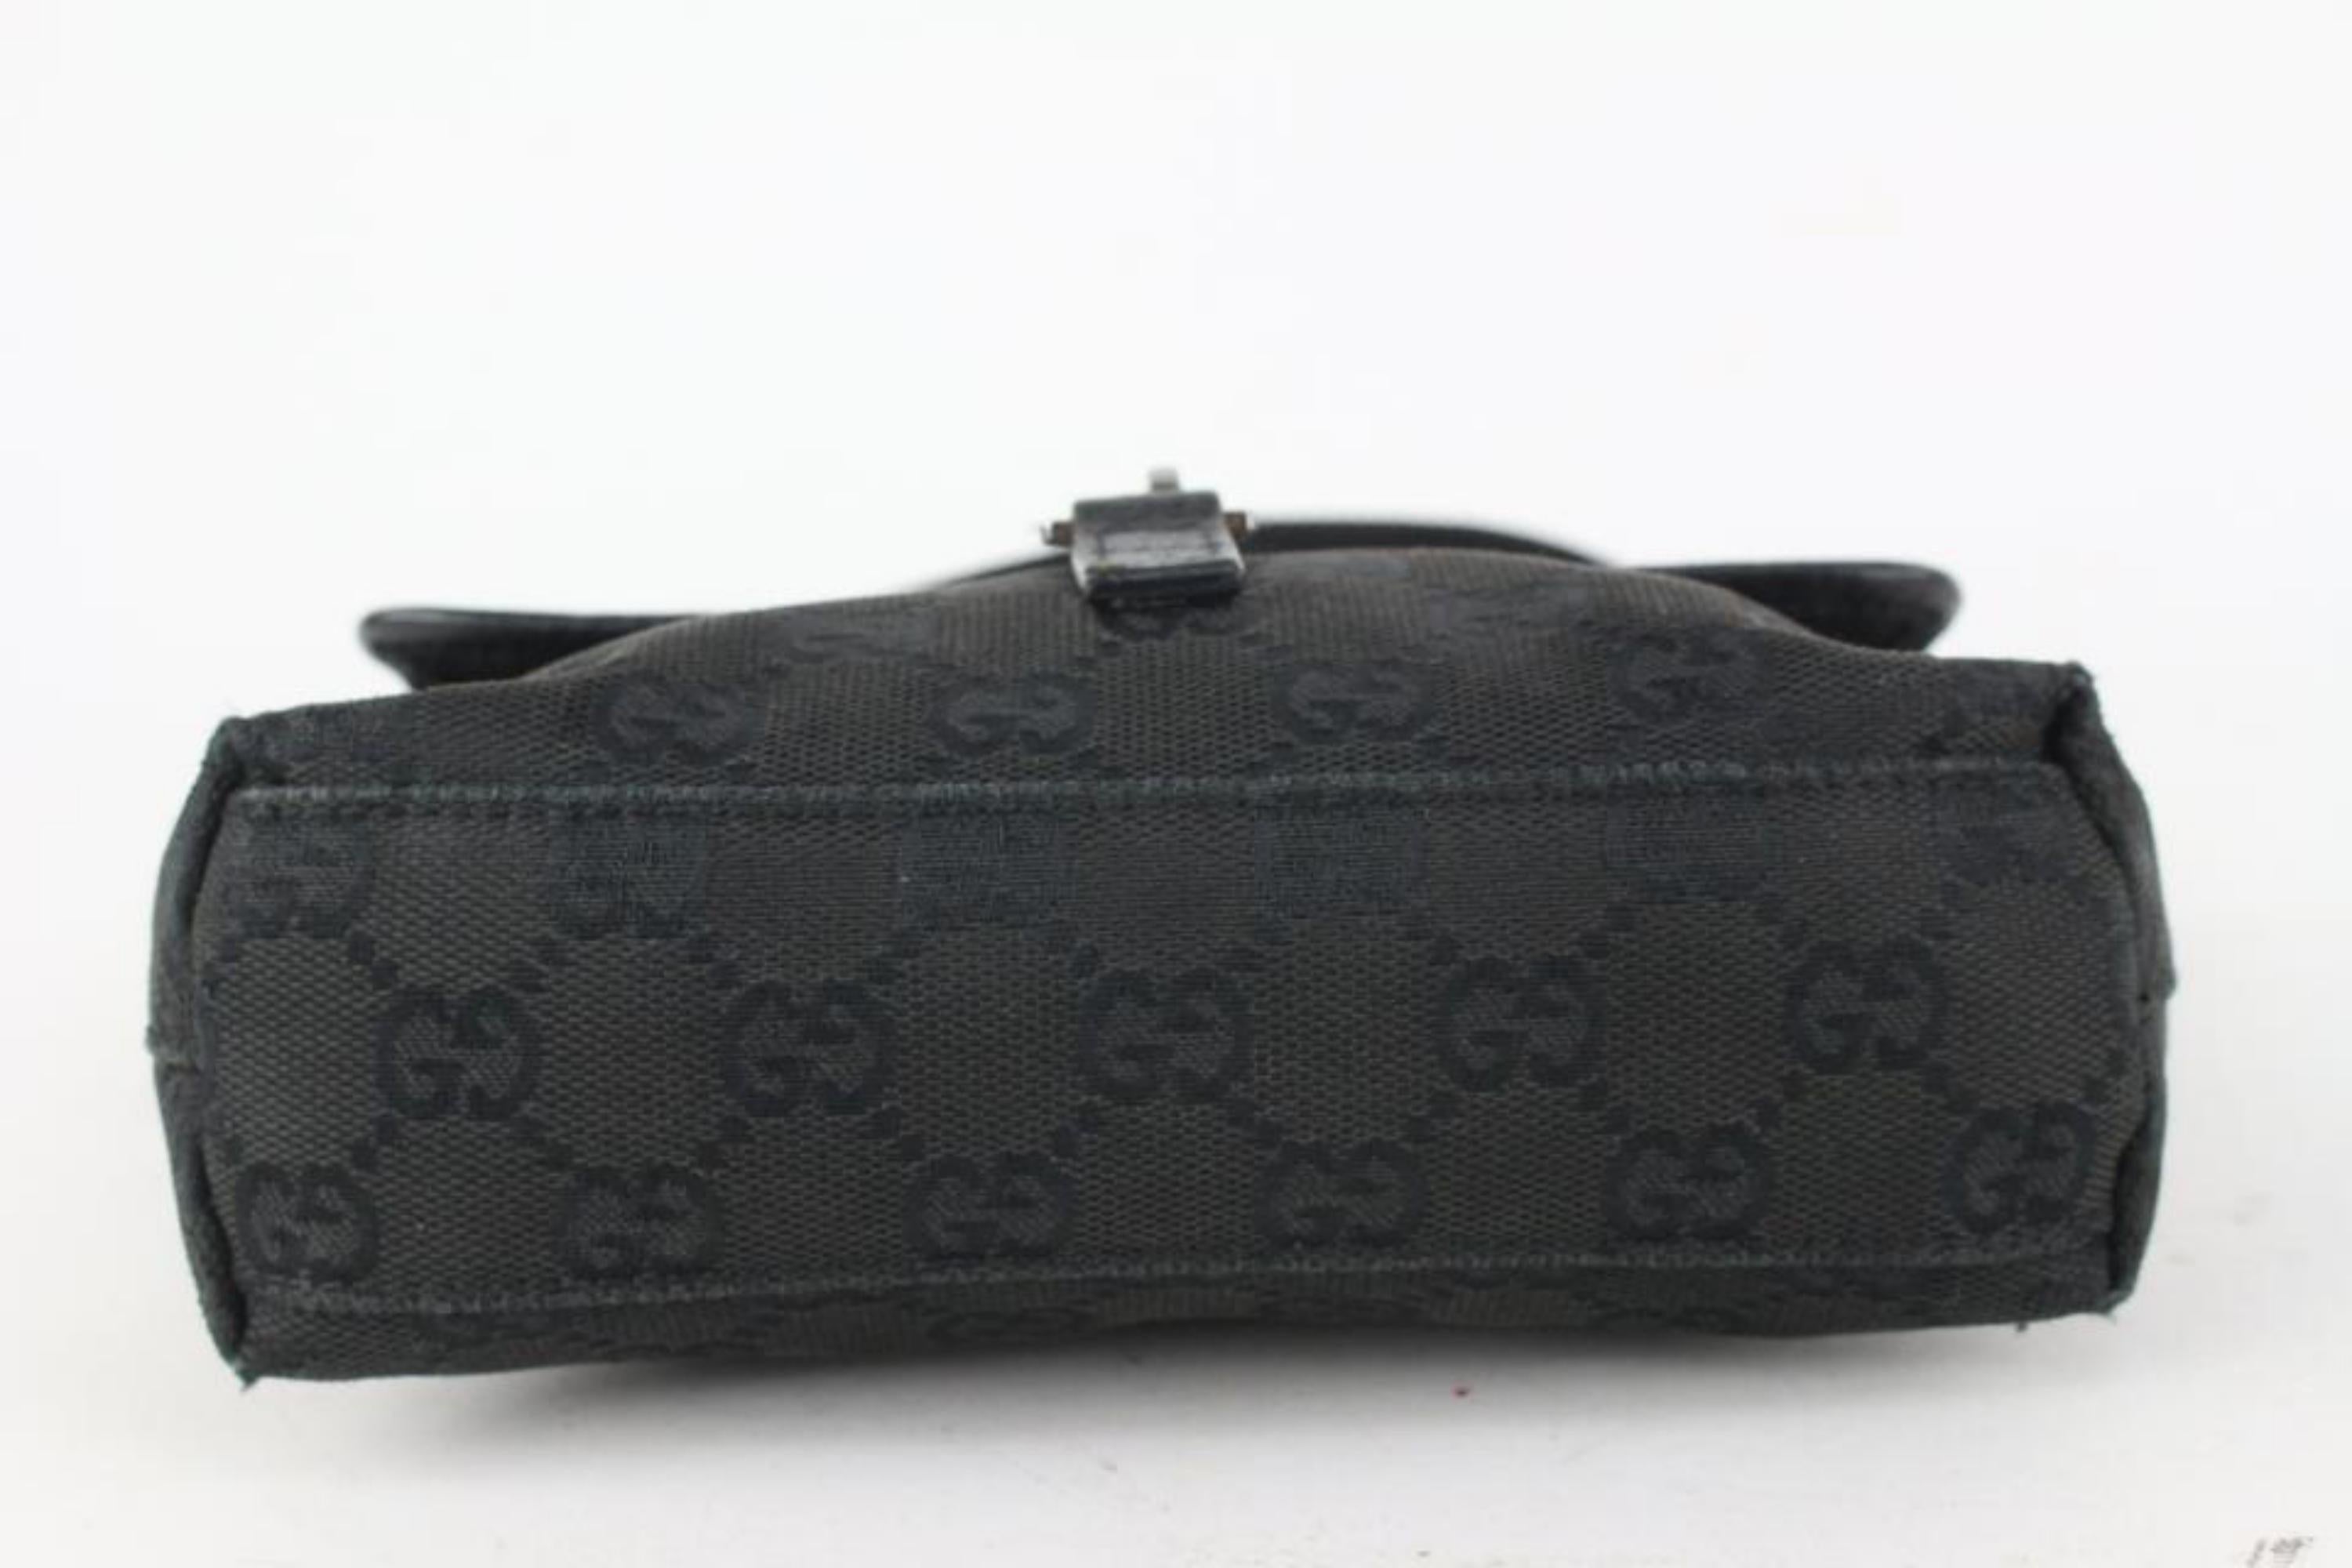 Gucci Black Monogram GG Belt Bag Fanny Pack Waist Pouch 927gk26 In Fair Condition For Sale In Dix hills, NY